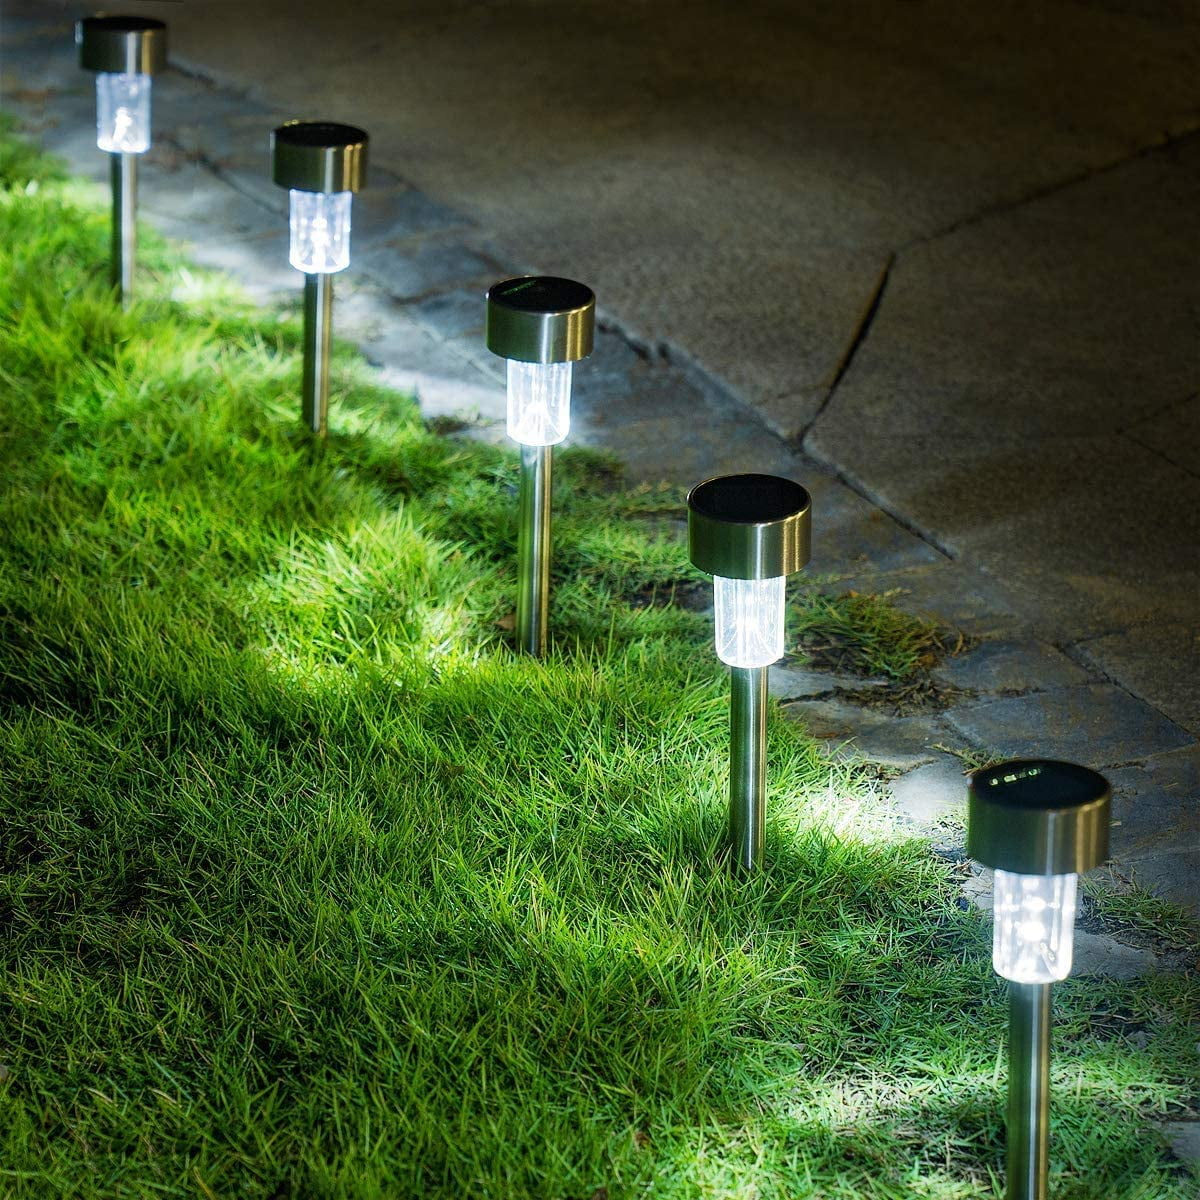 Details about   Stainless Steel LED Solar Powered Outdoor Lawn Lights Garden Path Landscape Lamp 